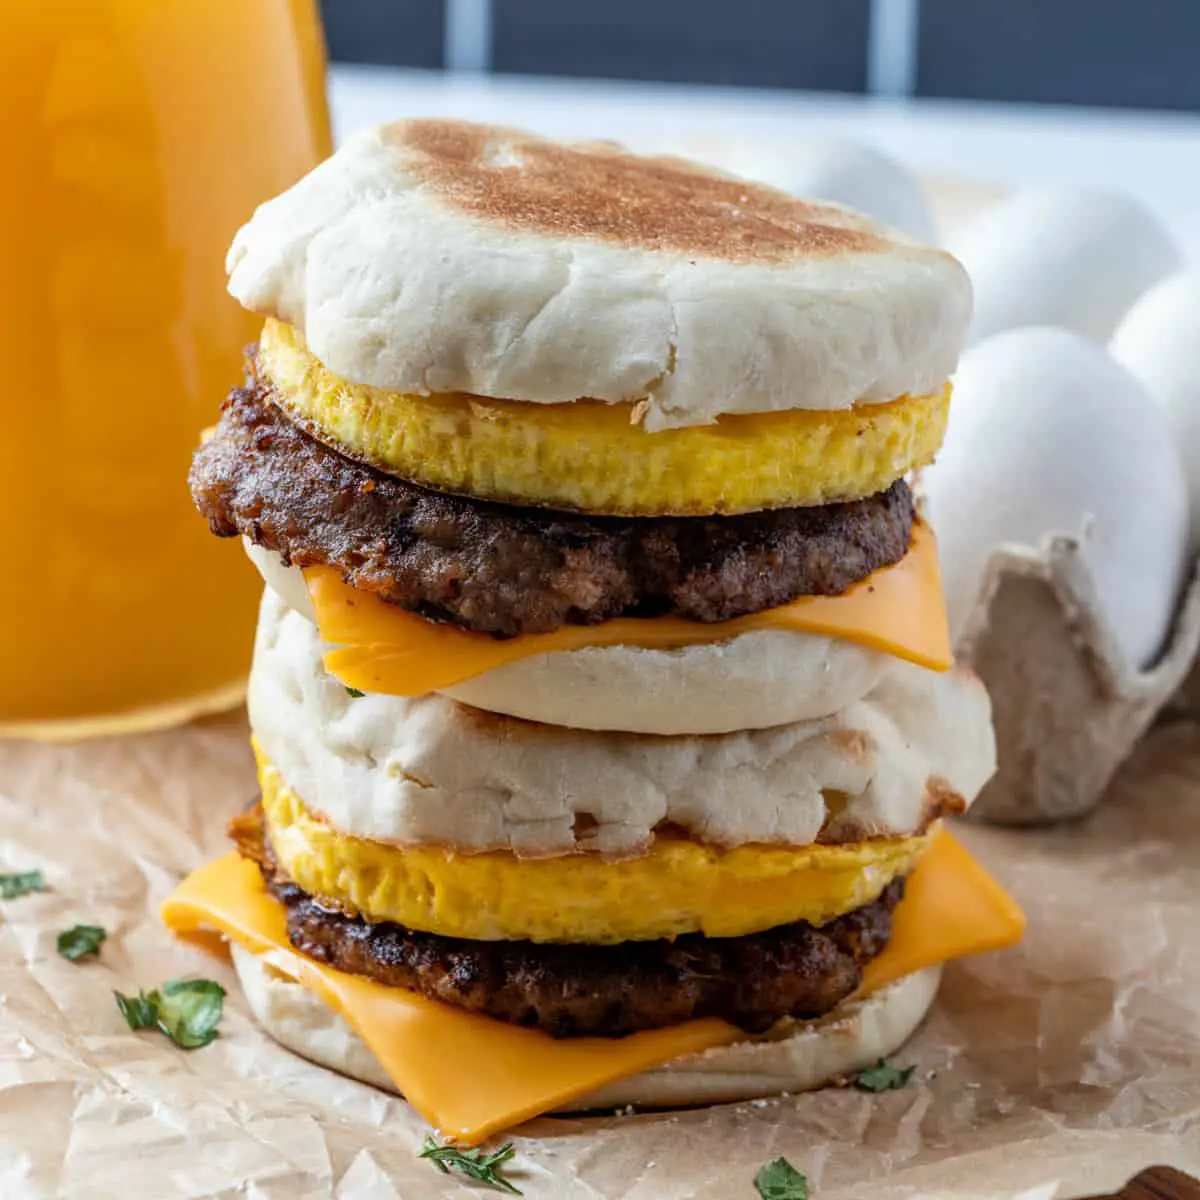 How Much Protein Is In An Egg Mcmuffin